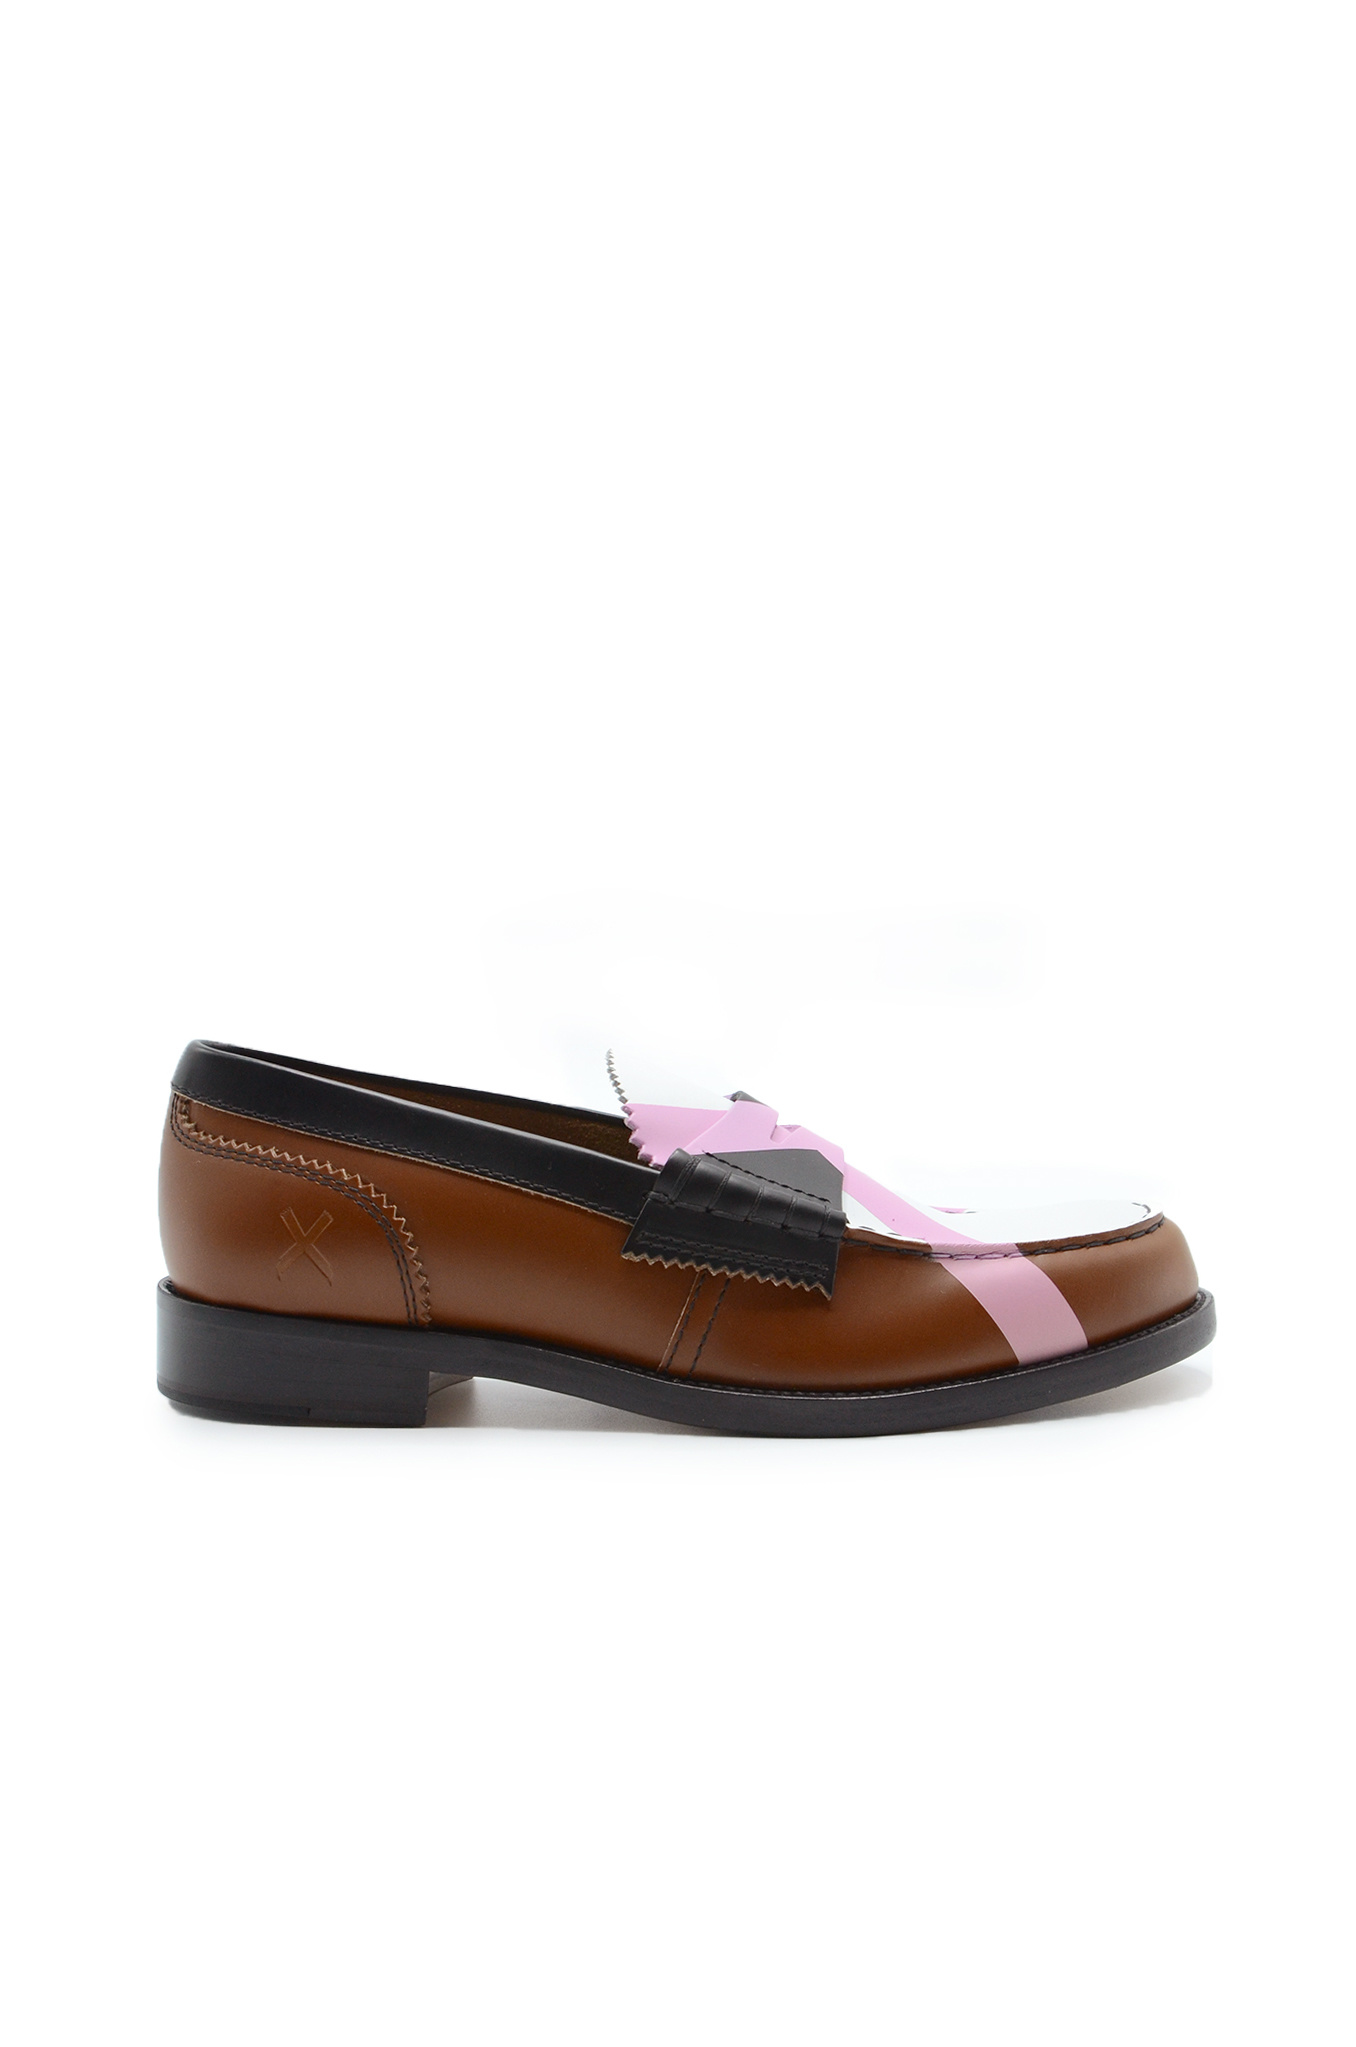 PENNY LOAFER IN TAN X PINK-1